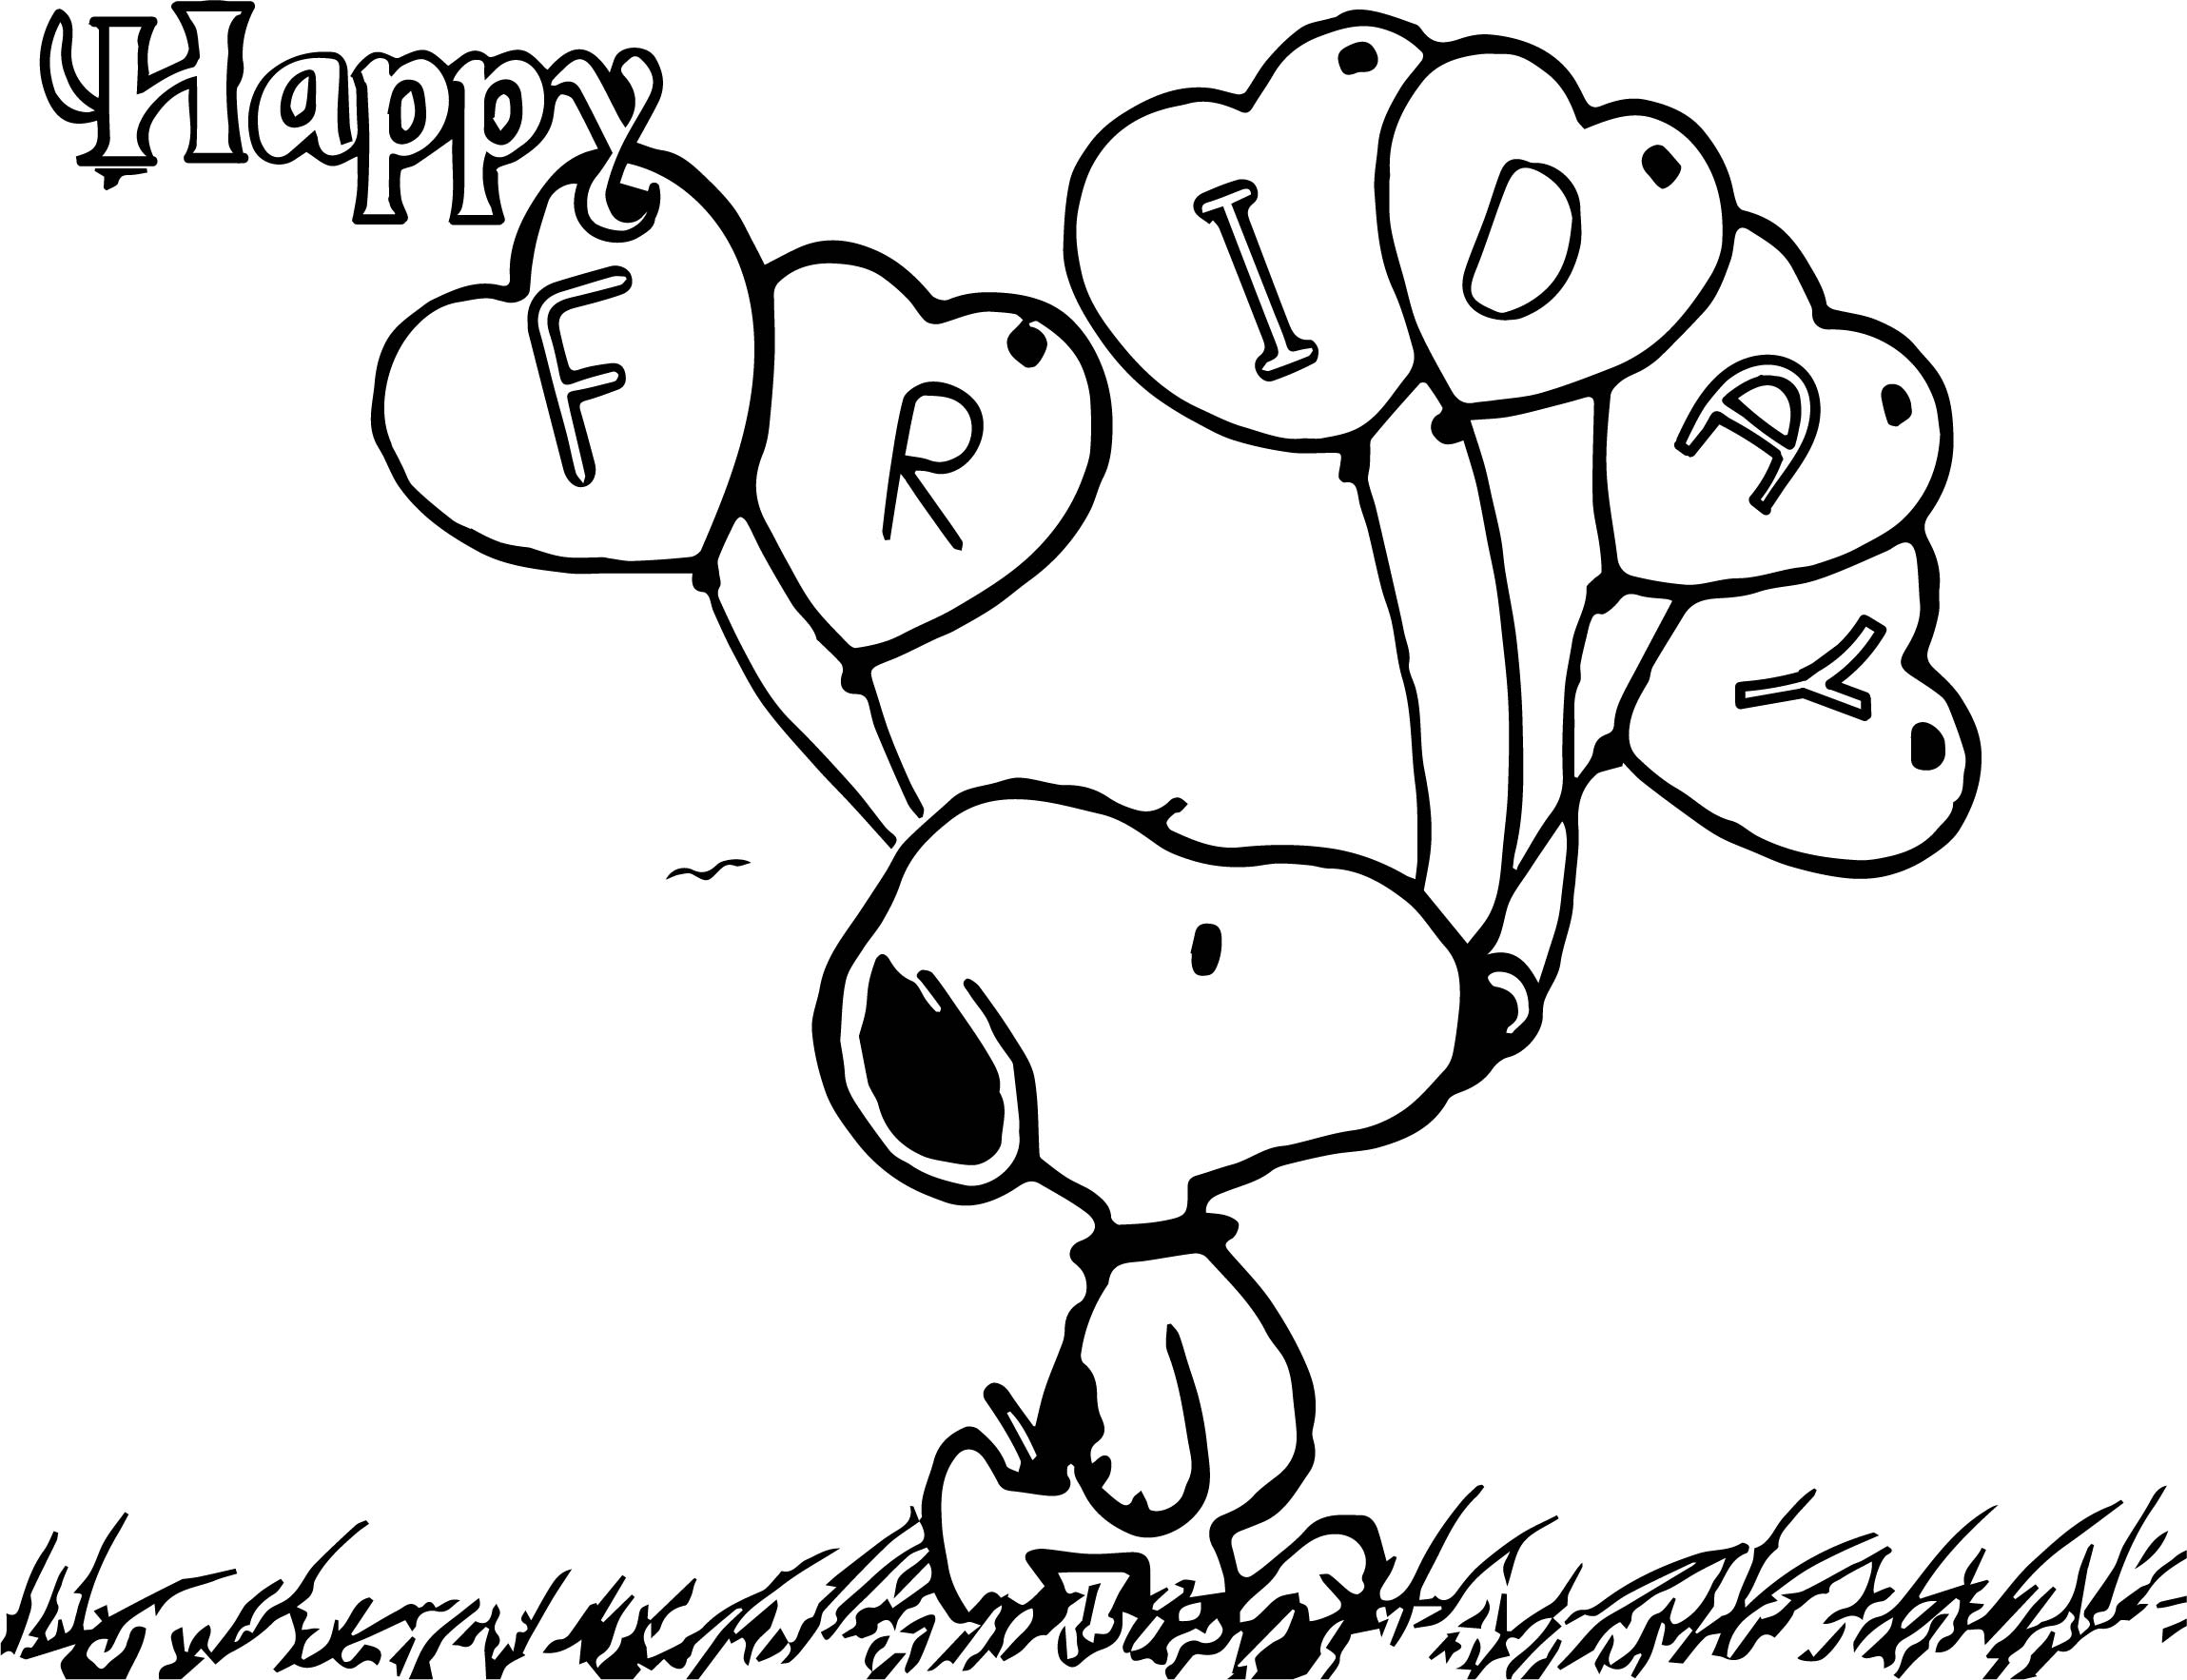 Snoopy And Woodstock Coloring Pages 25 Snoopy Coloring Pages Collections Free Coloring Pages Part 3